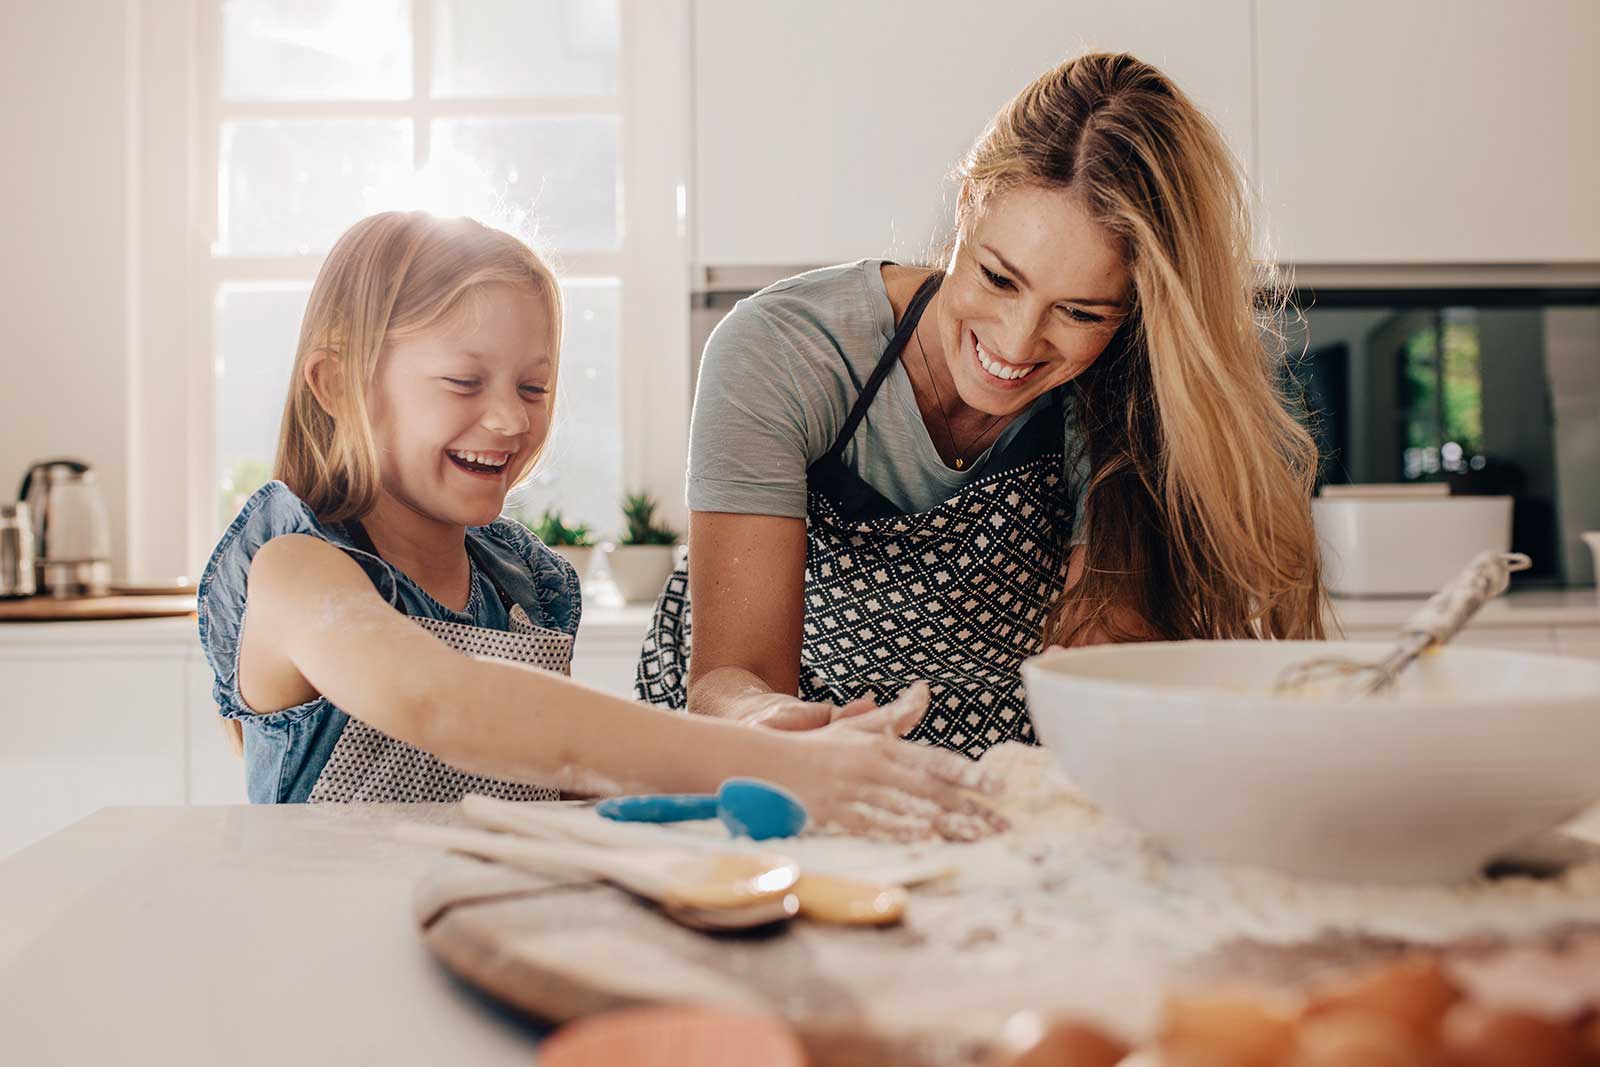 A mother and daughter laugh while baking in their kitchen.